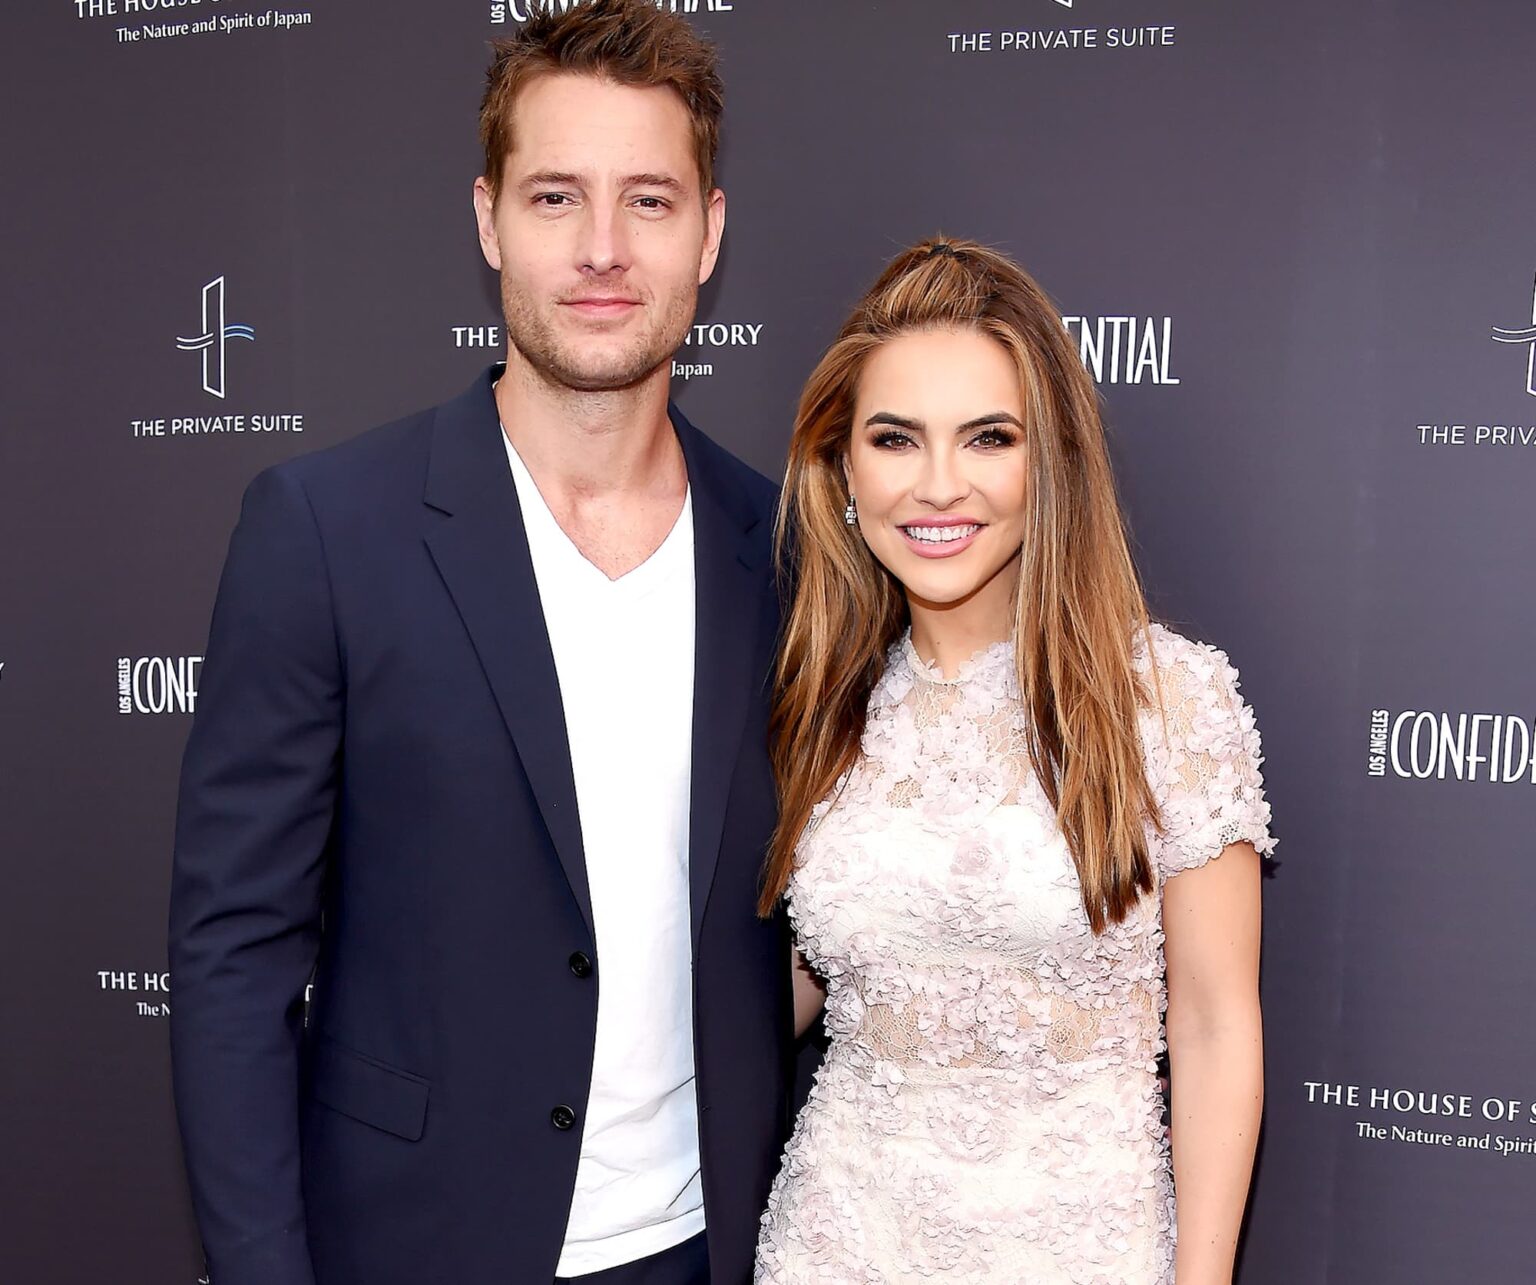 Has Justin Hartley officially called it quits from Chrishell Stause? Check out everything we know about the former couple and their new relationships.